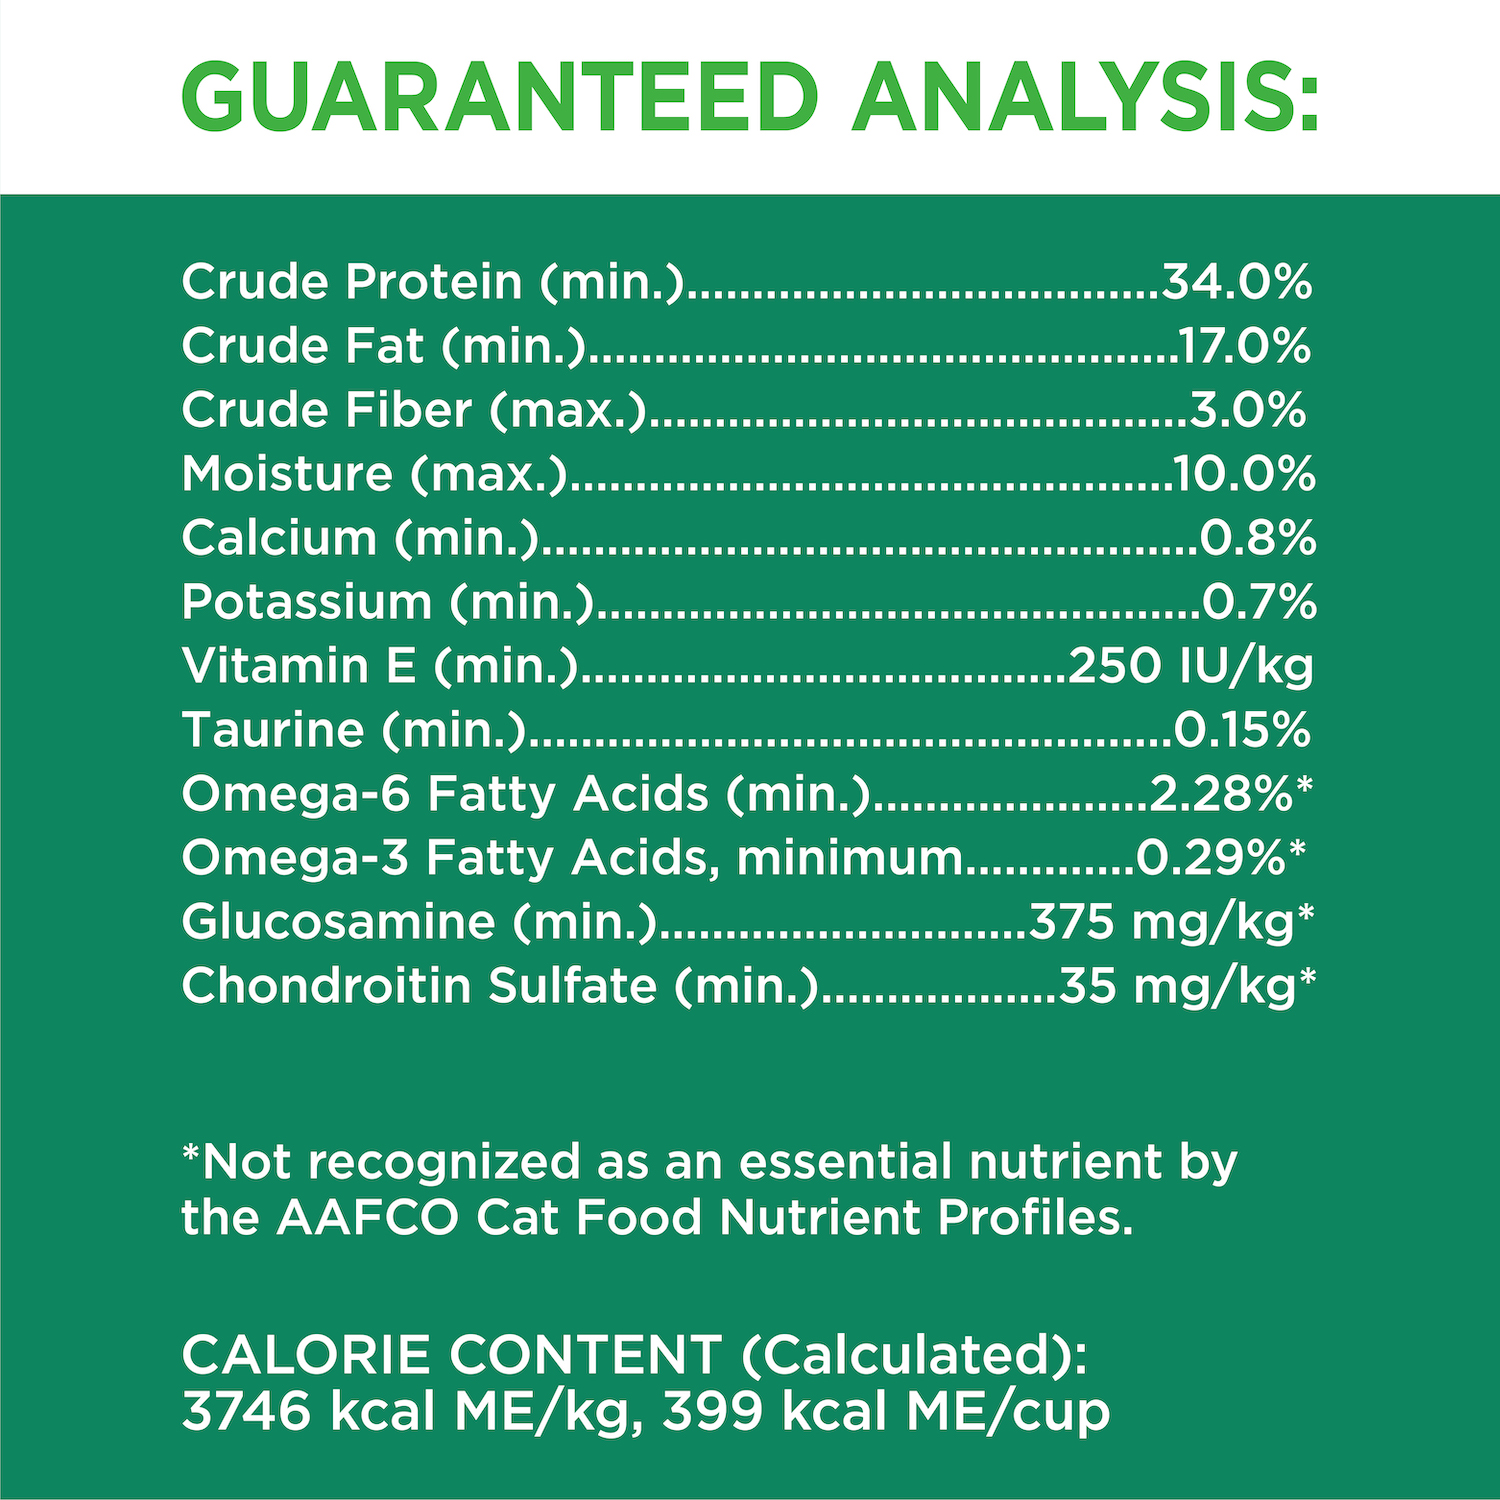 IAMS™ Healthy Senior Dry Cat Food with Chicken guaranteed analysis image